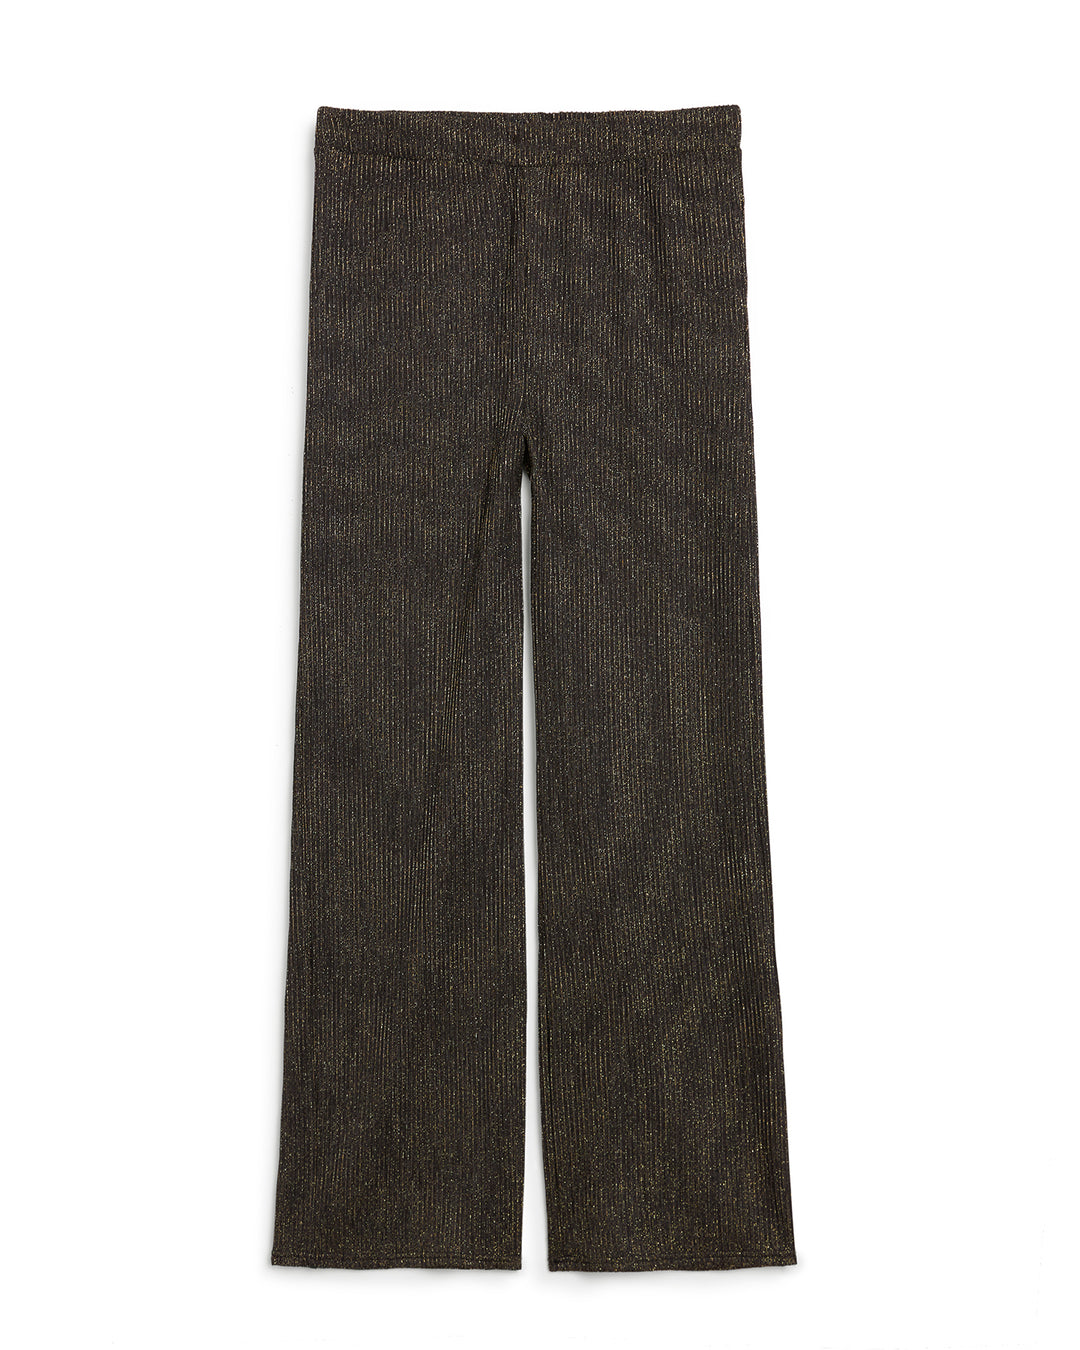 A pair of brown wide leg The Hydra Sheer Shimmer Pant - Onyx pants from Dandy Del Mar with an elastic waist for added comfort.